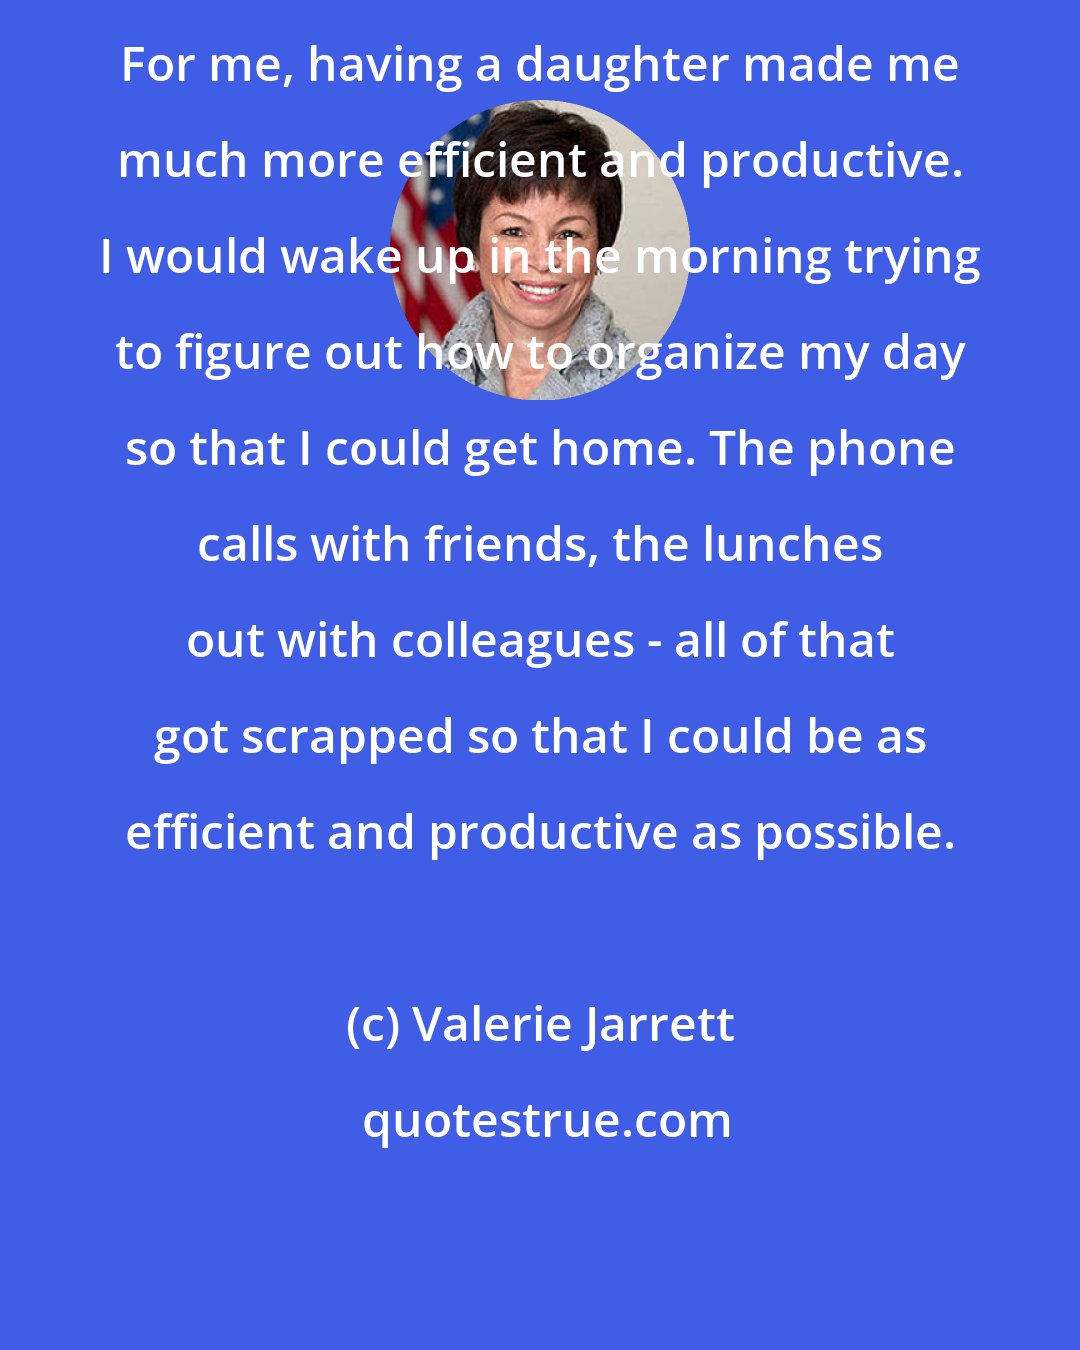 Valerie Jarrett: For me, having a daughter made me much more efficient and productive. I would wake up in the morning trying to figure out how to organize my day so that I could get home. The phone calls with friends, the lunches out with colleagues - all of that got scrapped so that I could be as efficient and productive as possible.